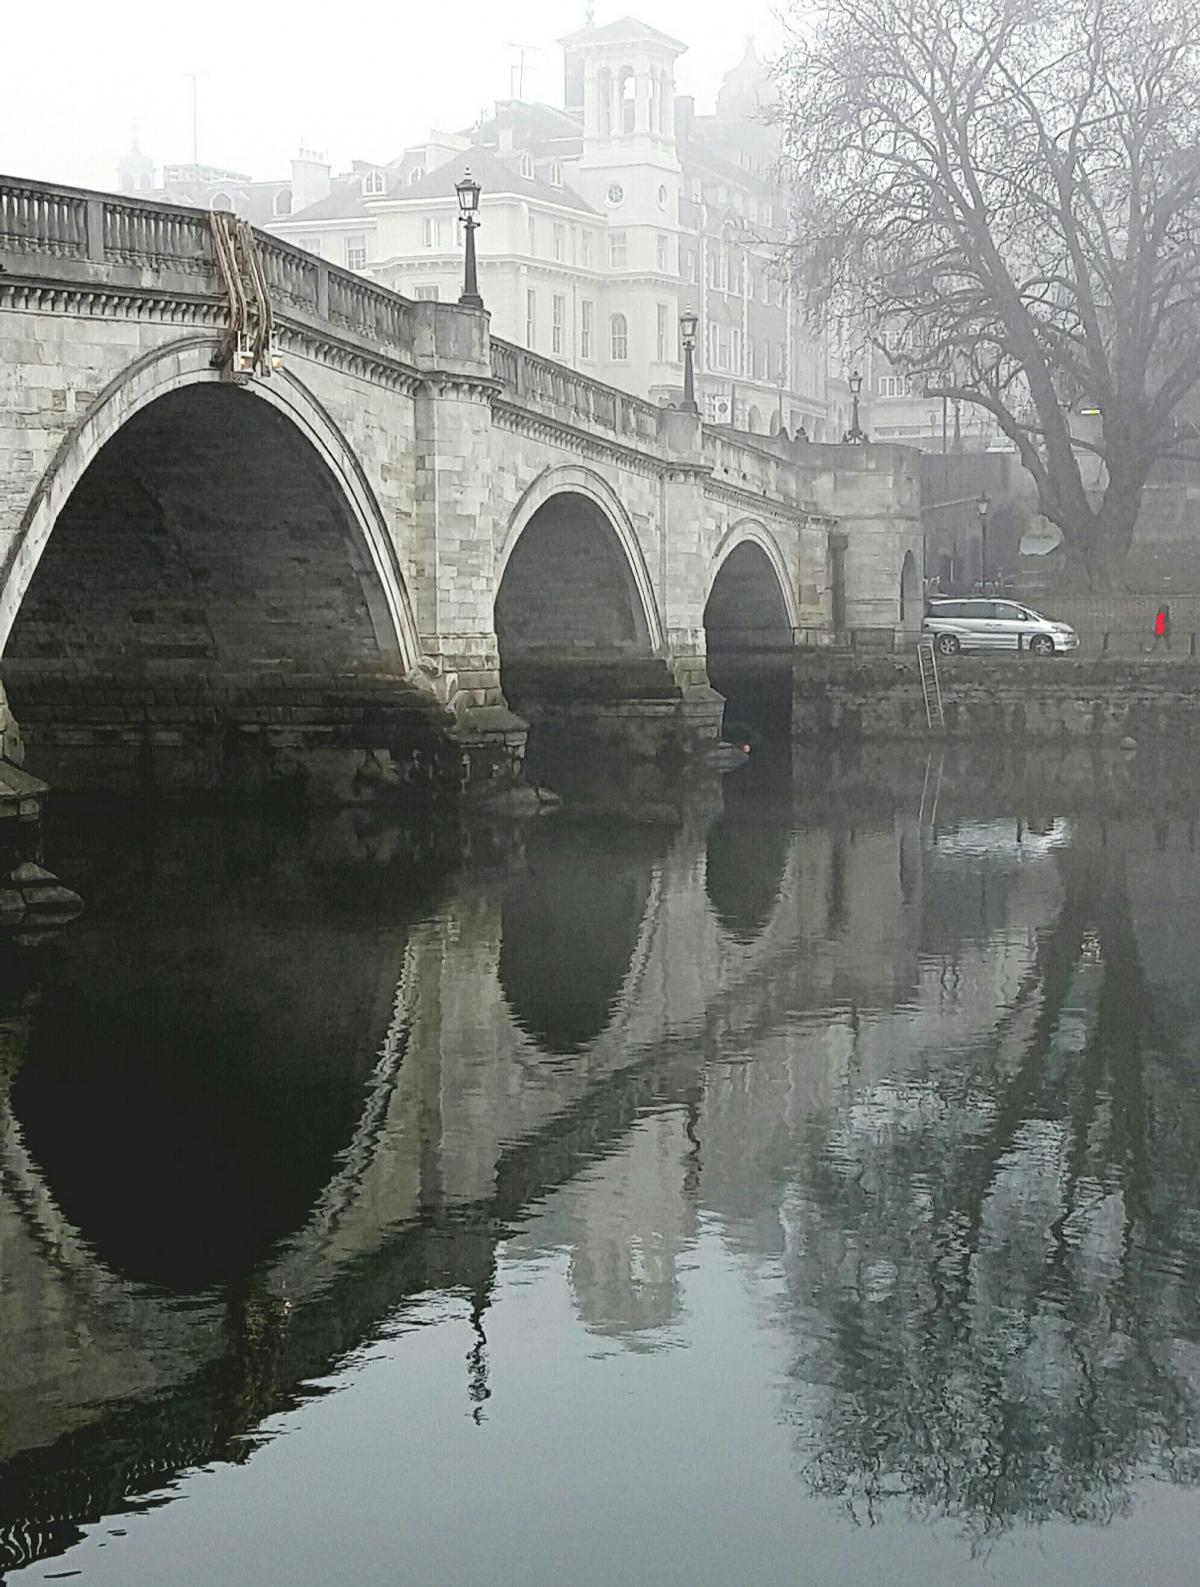 June Park took this photo of a misty Richmond Bridge. She said the bridge "takes on a truly mysterious cloak".